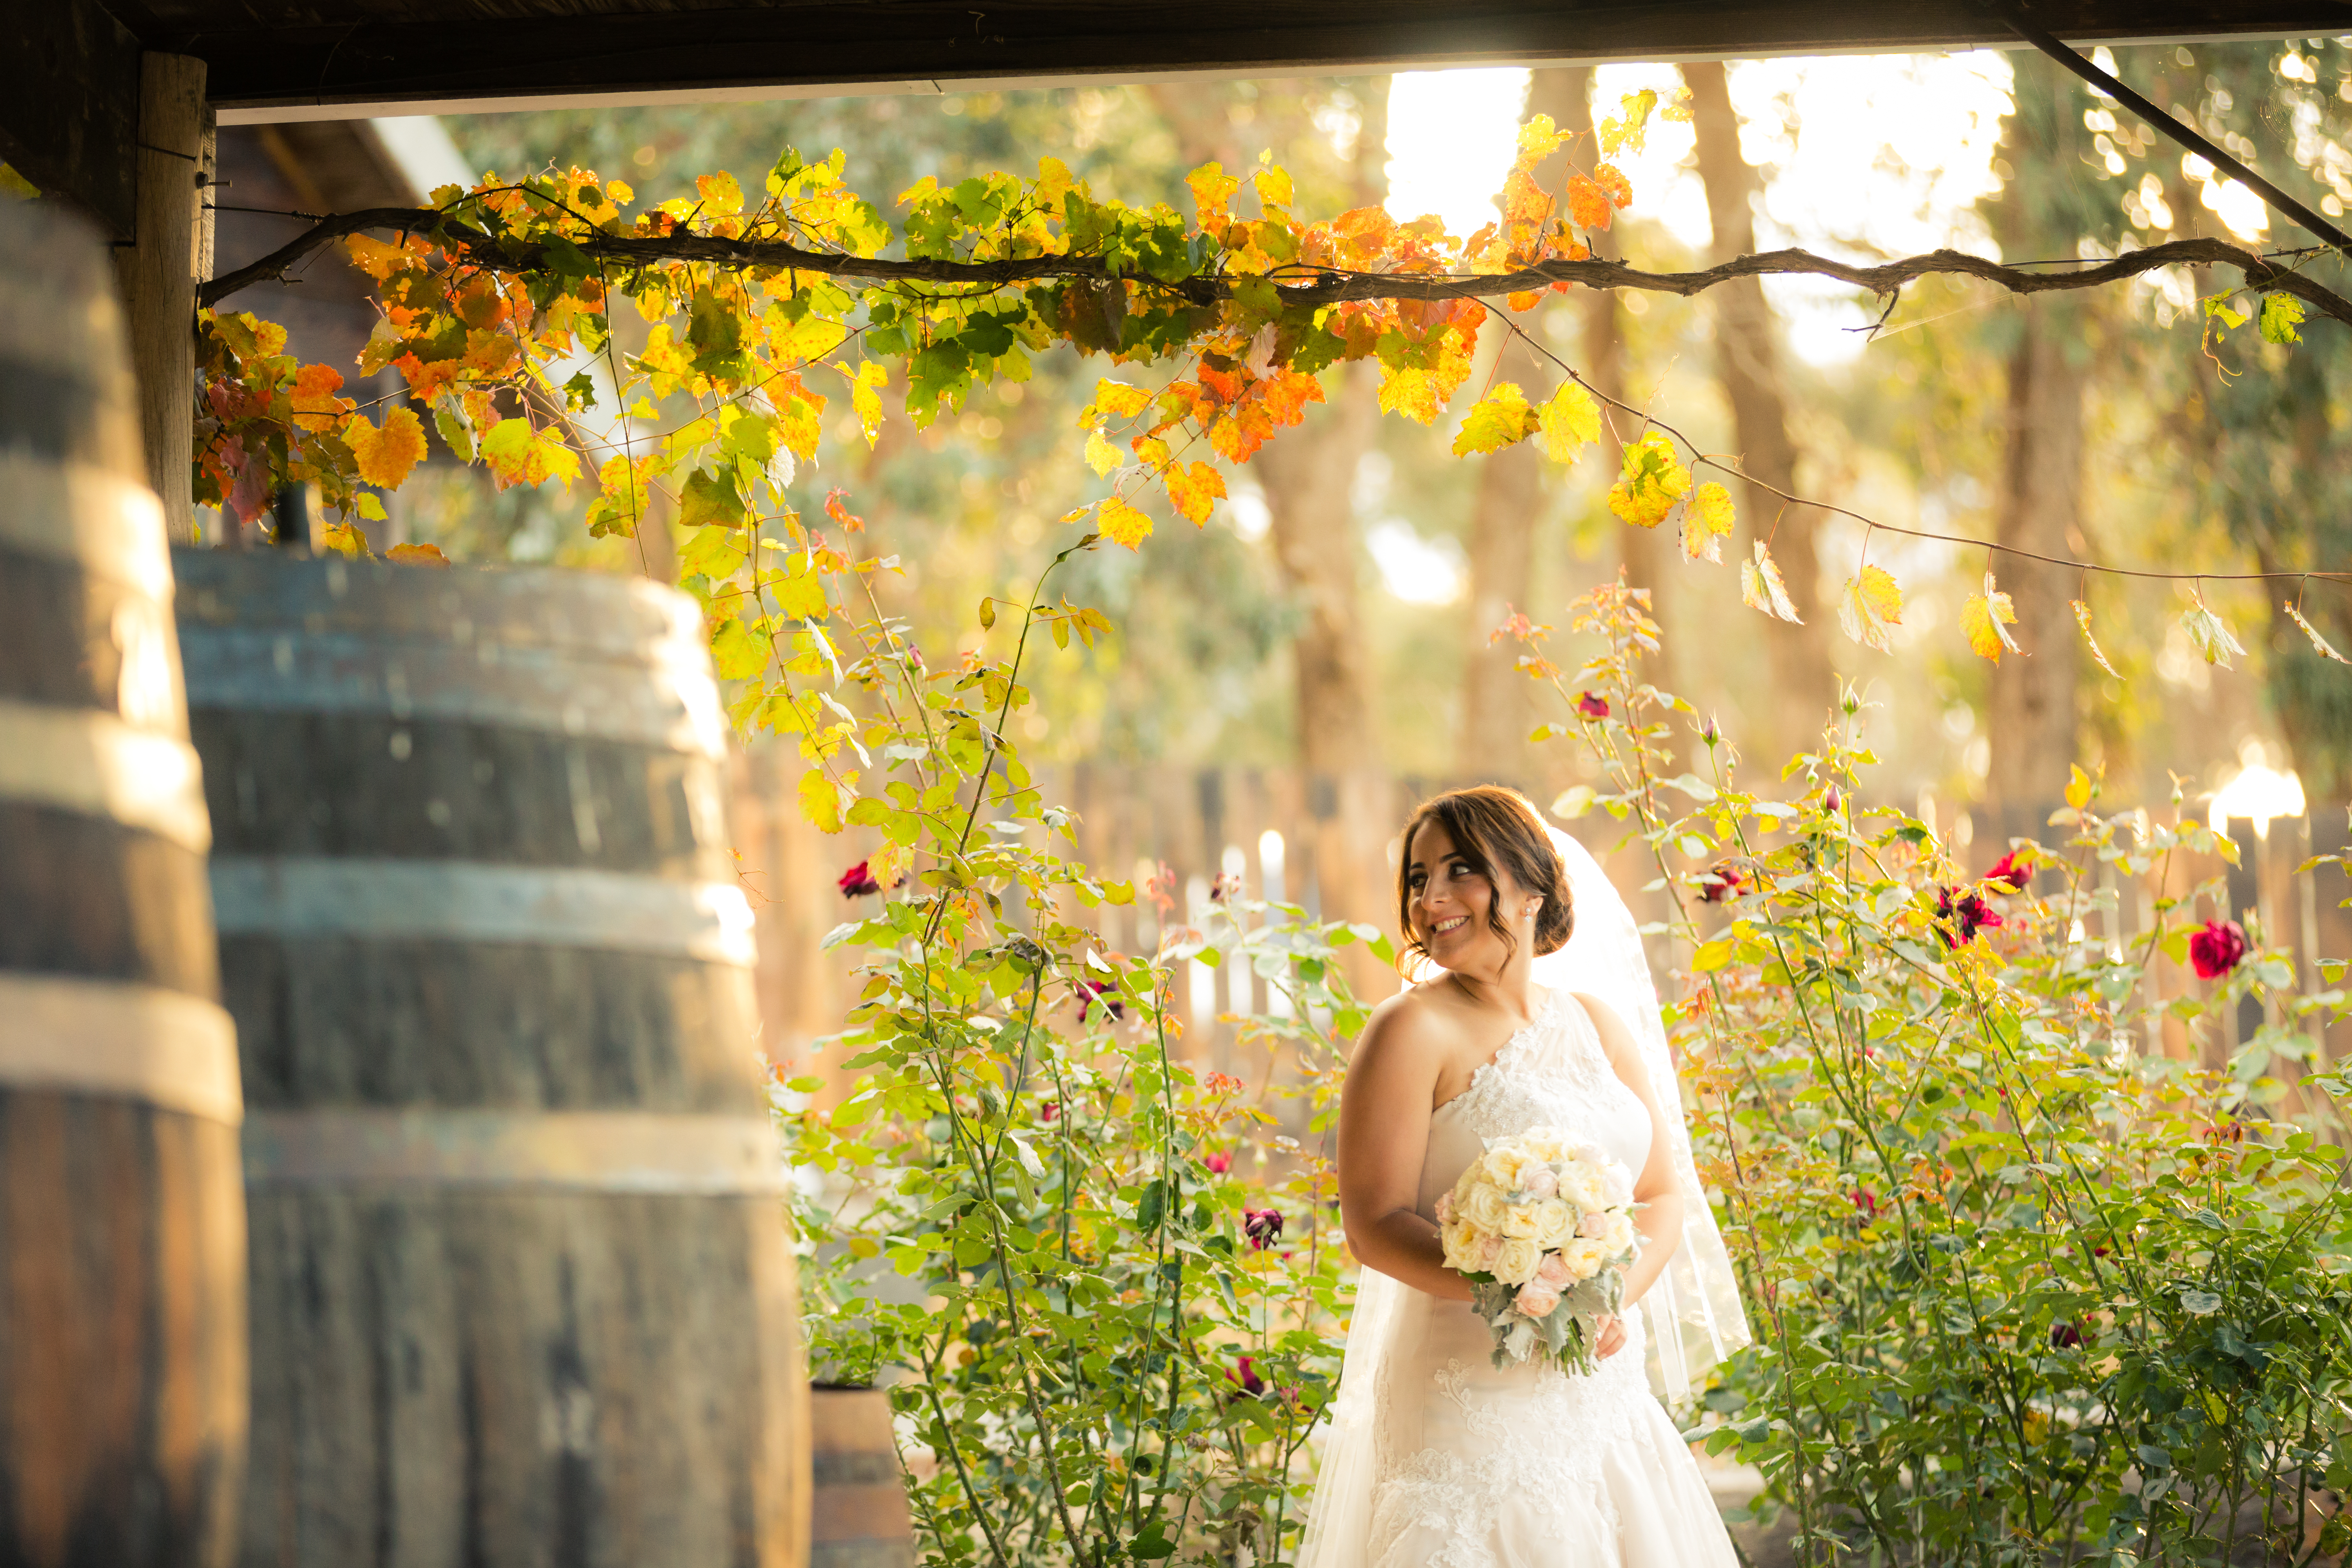 Just Married Woman in the Vineyard next to Wine Barrels